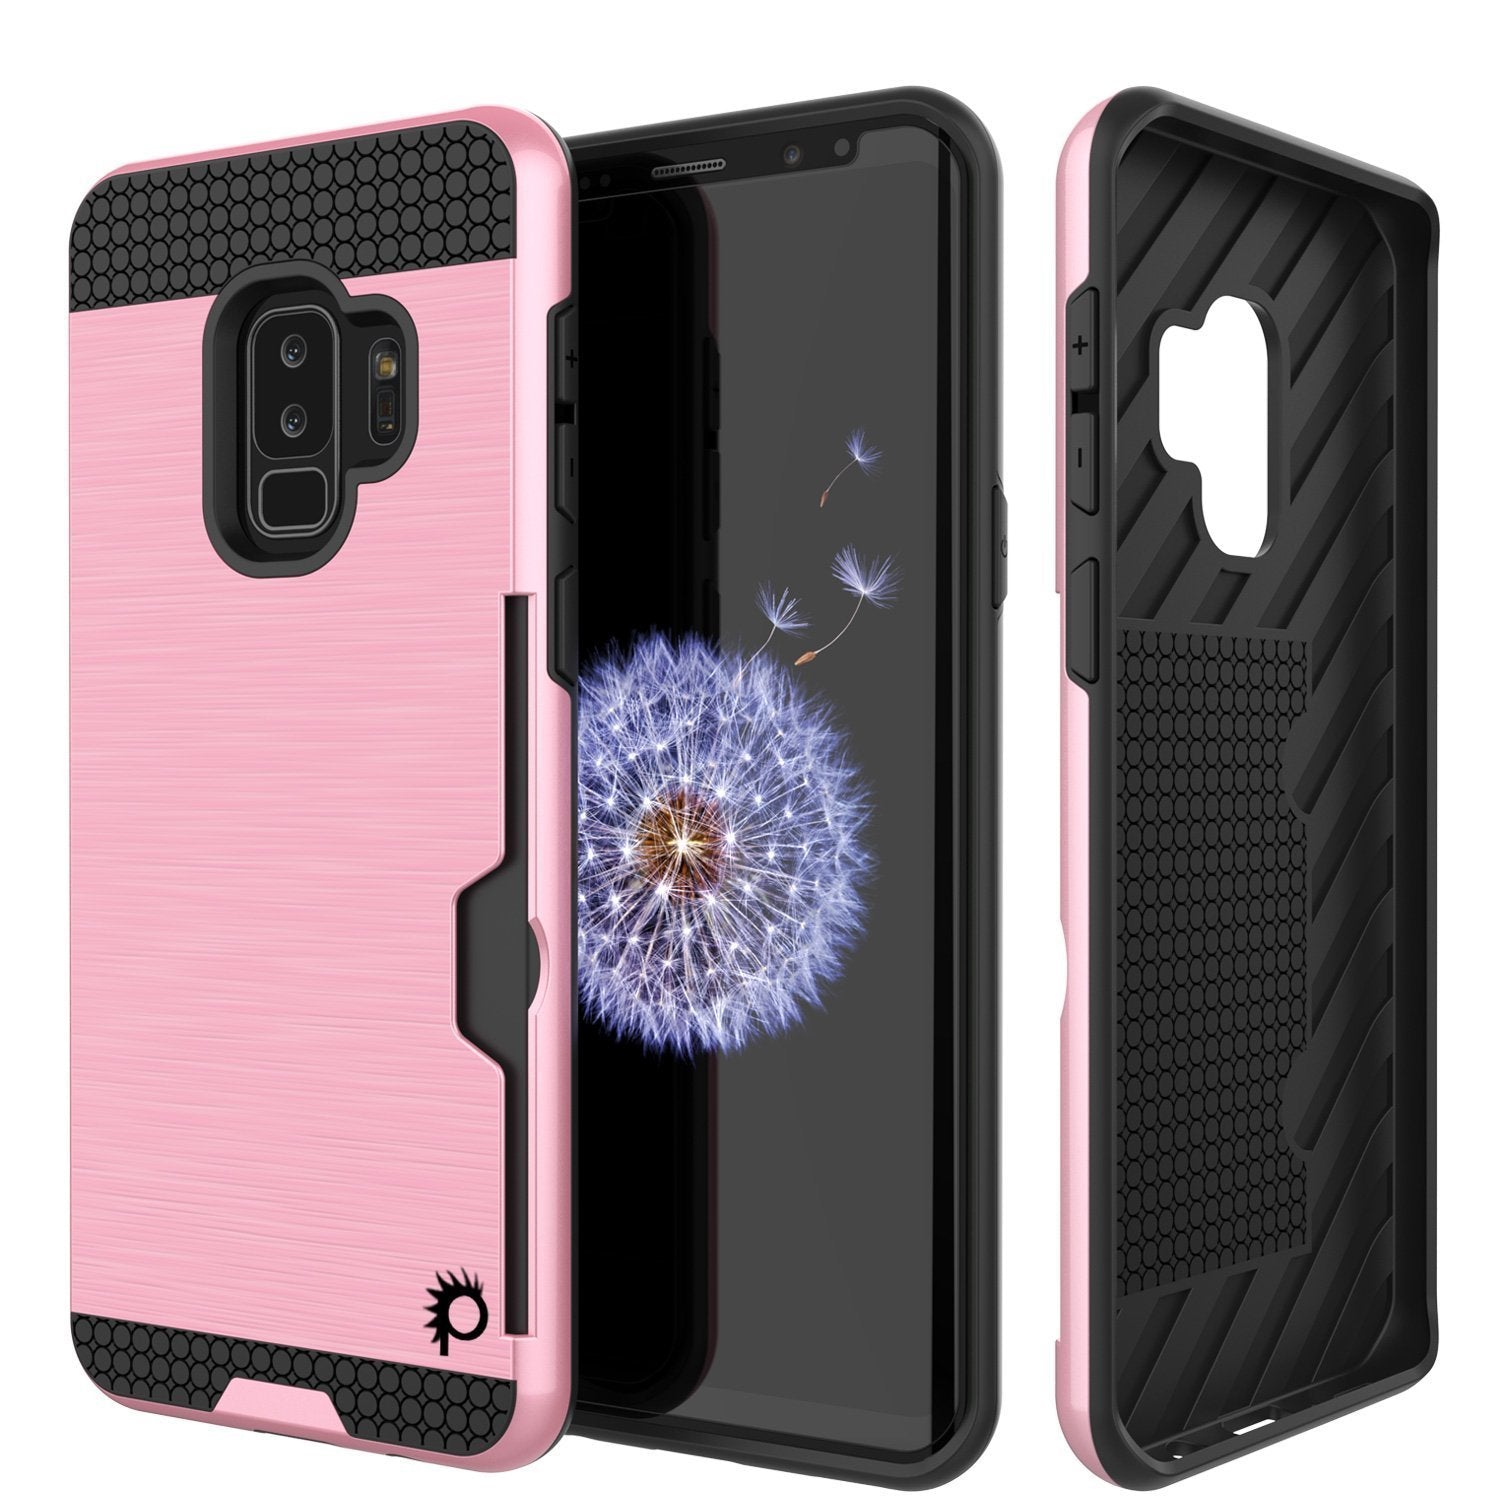 Galaxy S9 Plus Case, PUNKcase [SLOT Series] [Slim Fit] Dual-Layer Armor Cover w/Integrated Anti-Shock System [Pink]